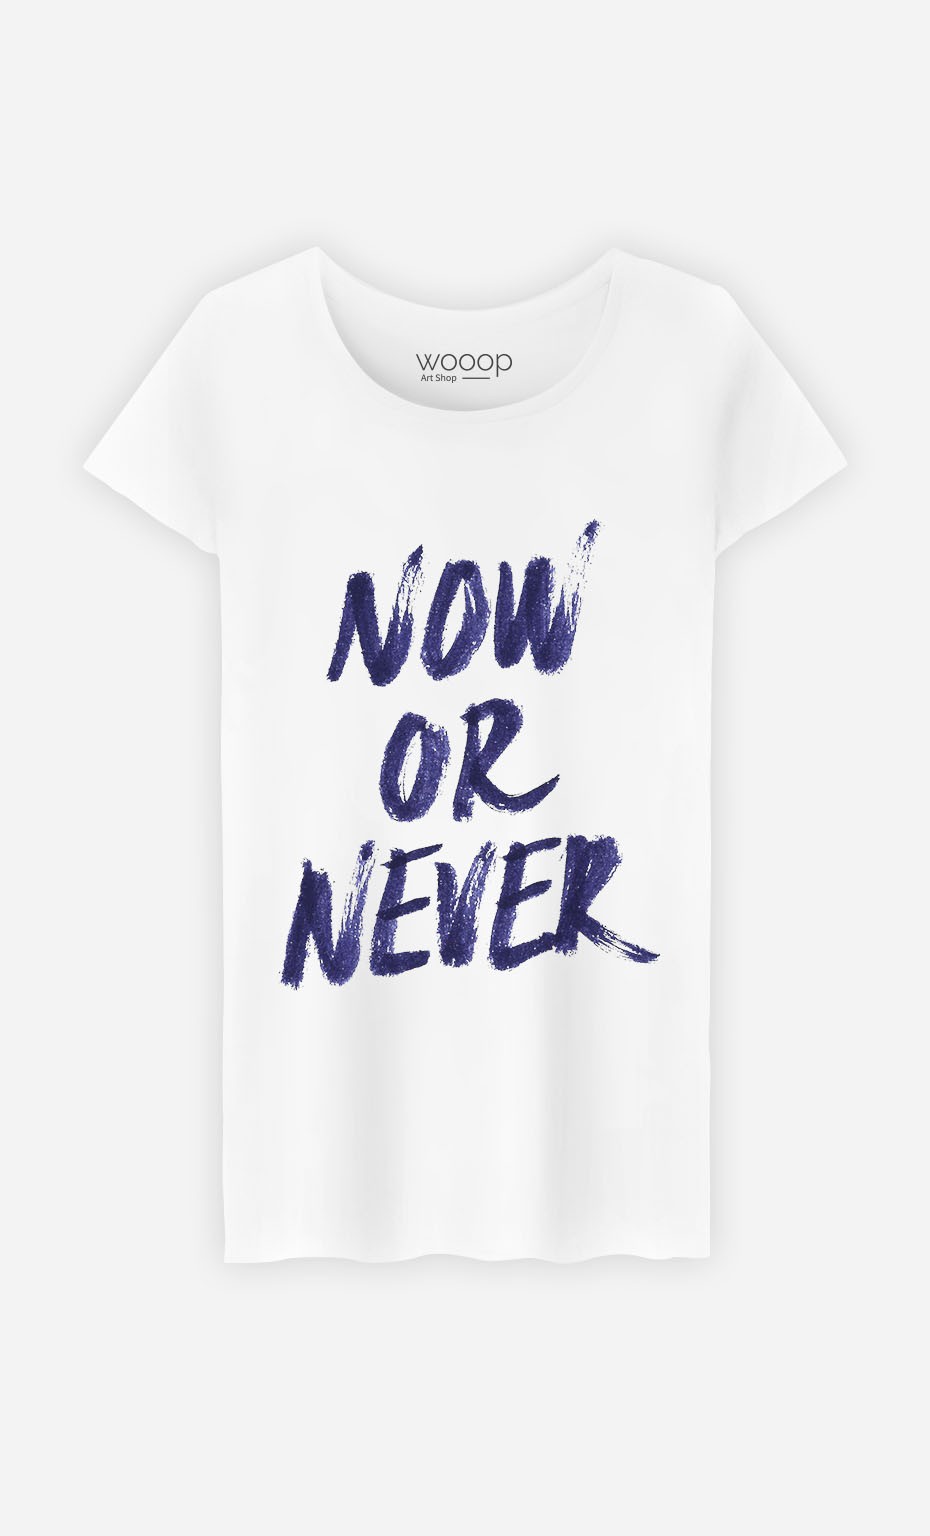 T-Shirt Now Or Never